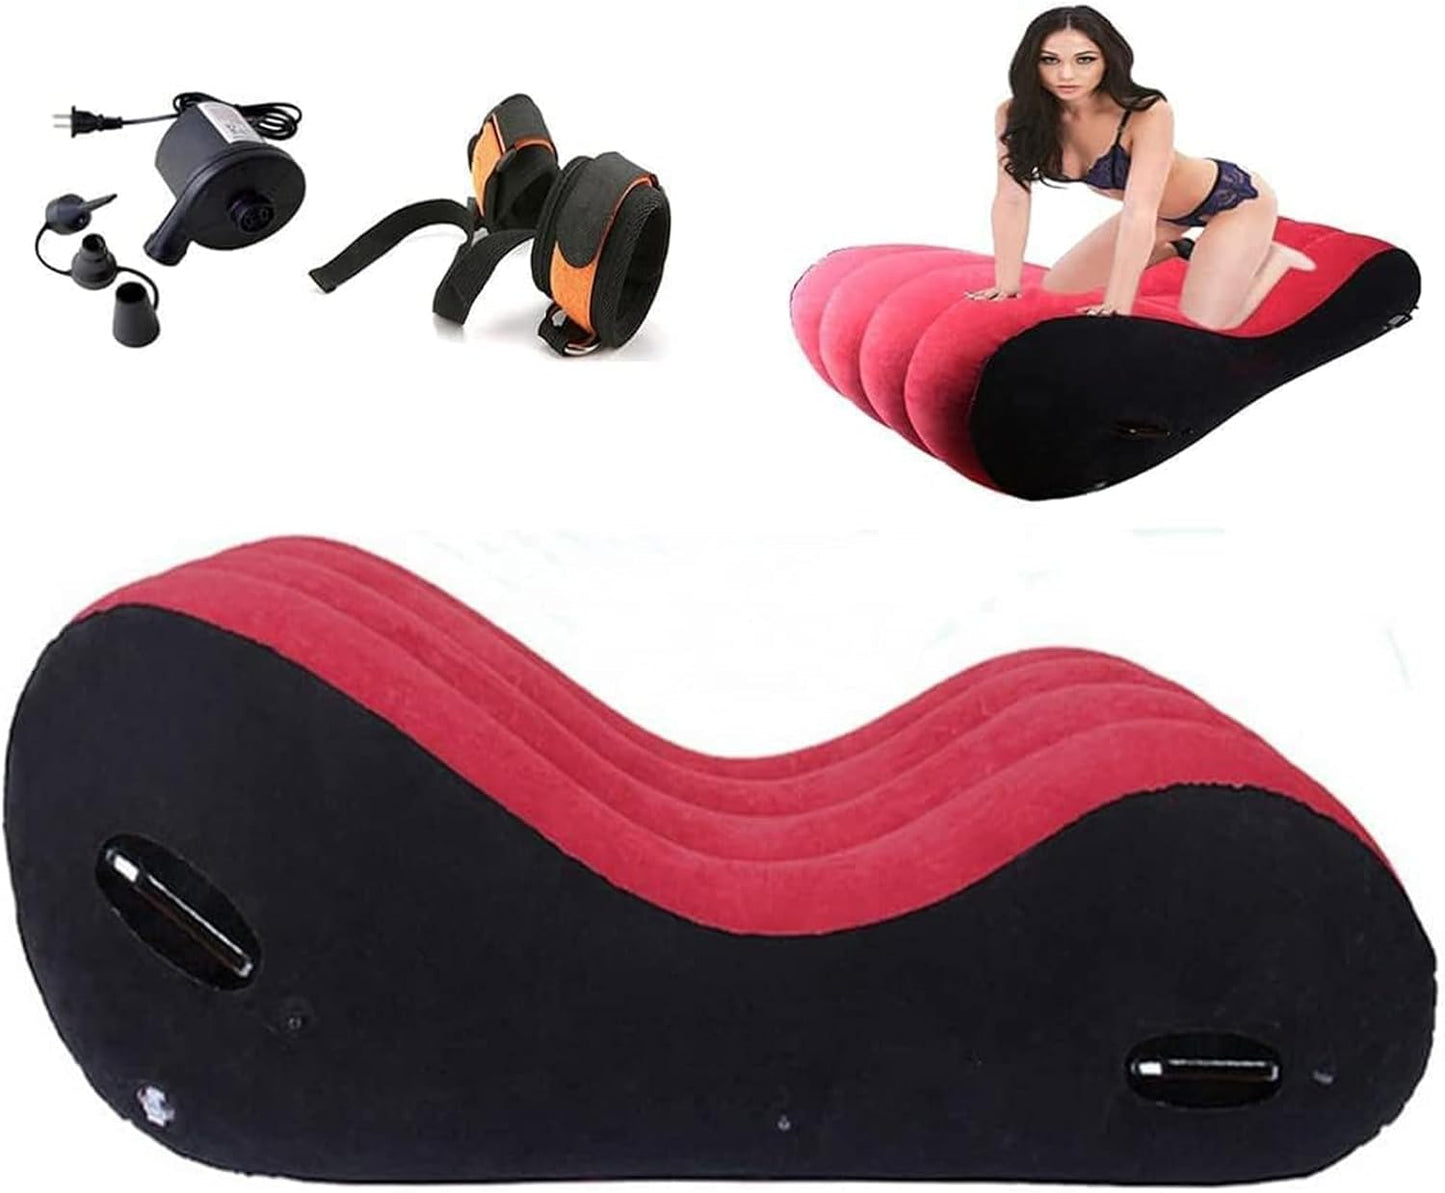 Inflatable Sex Bench